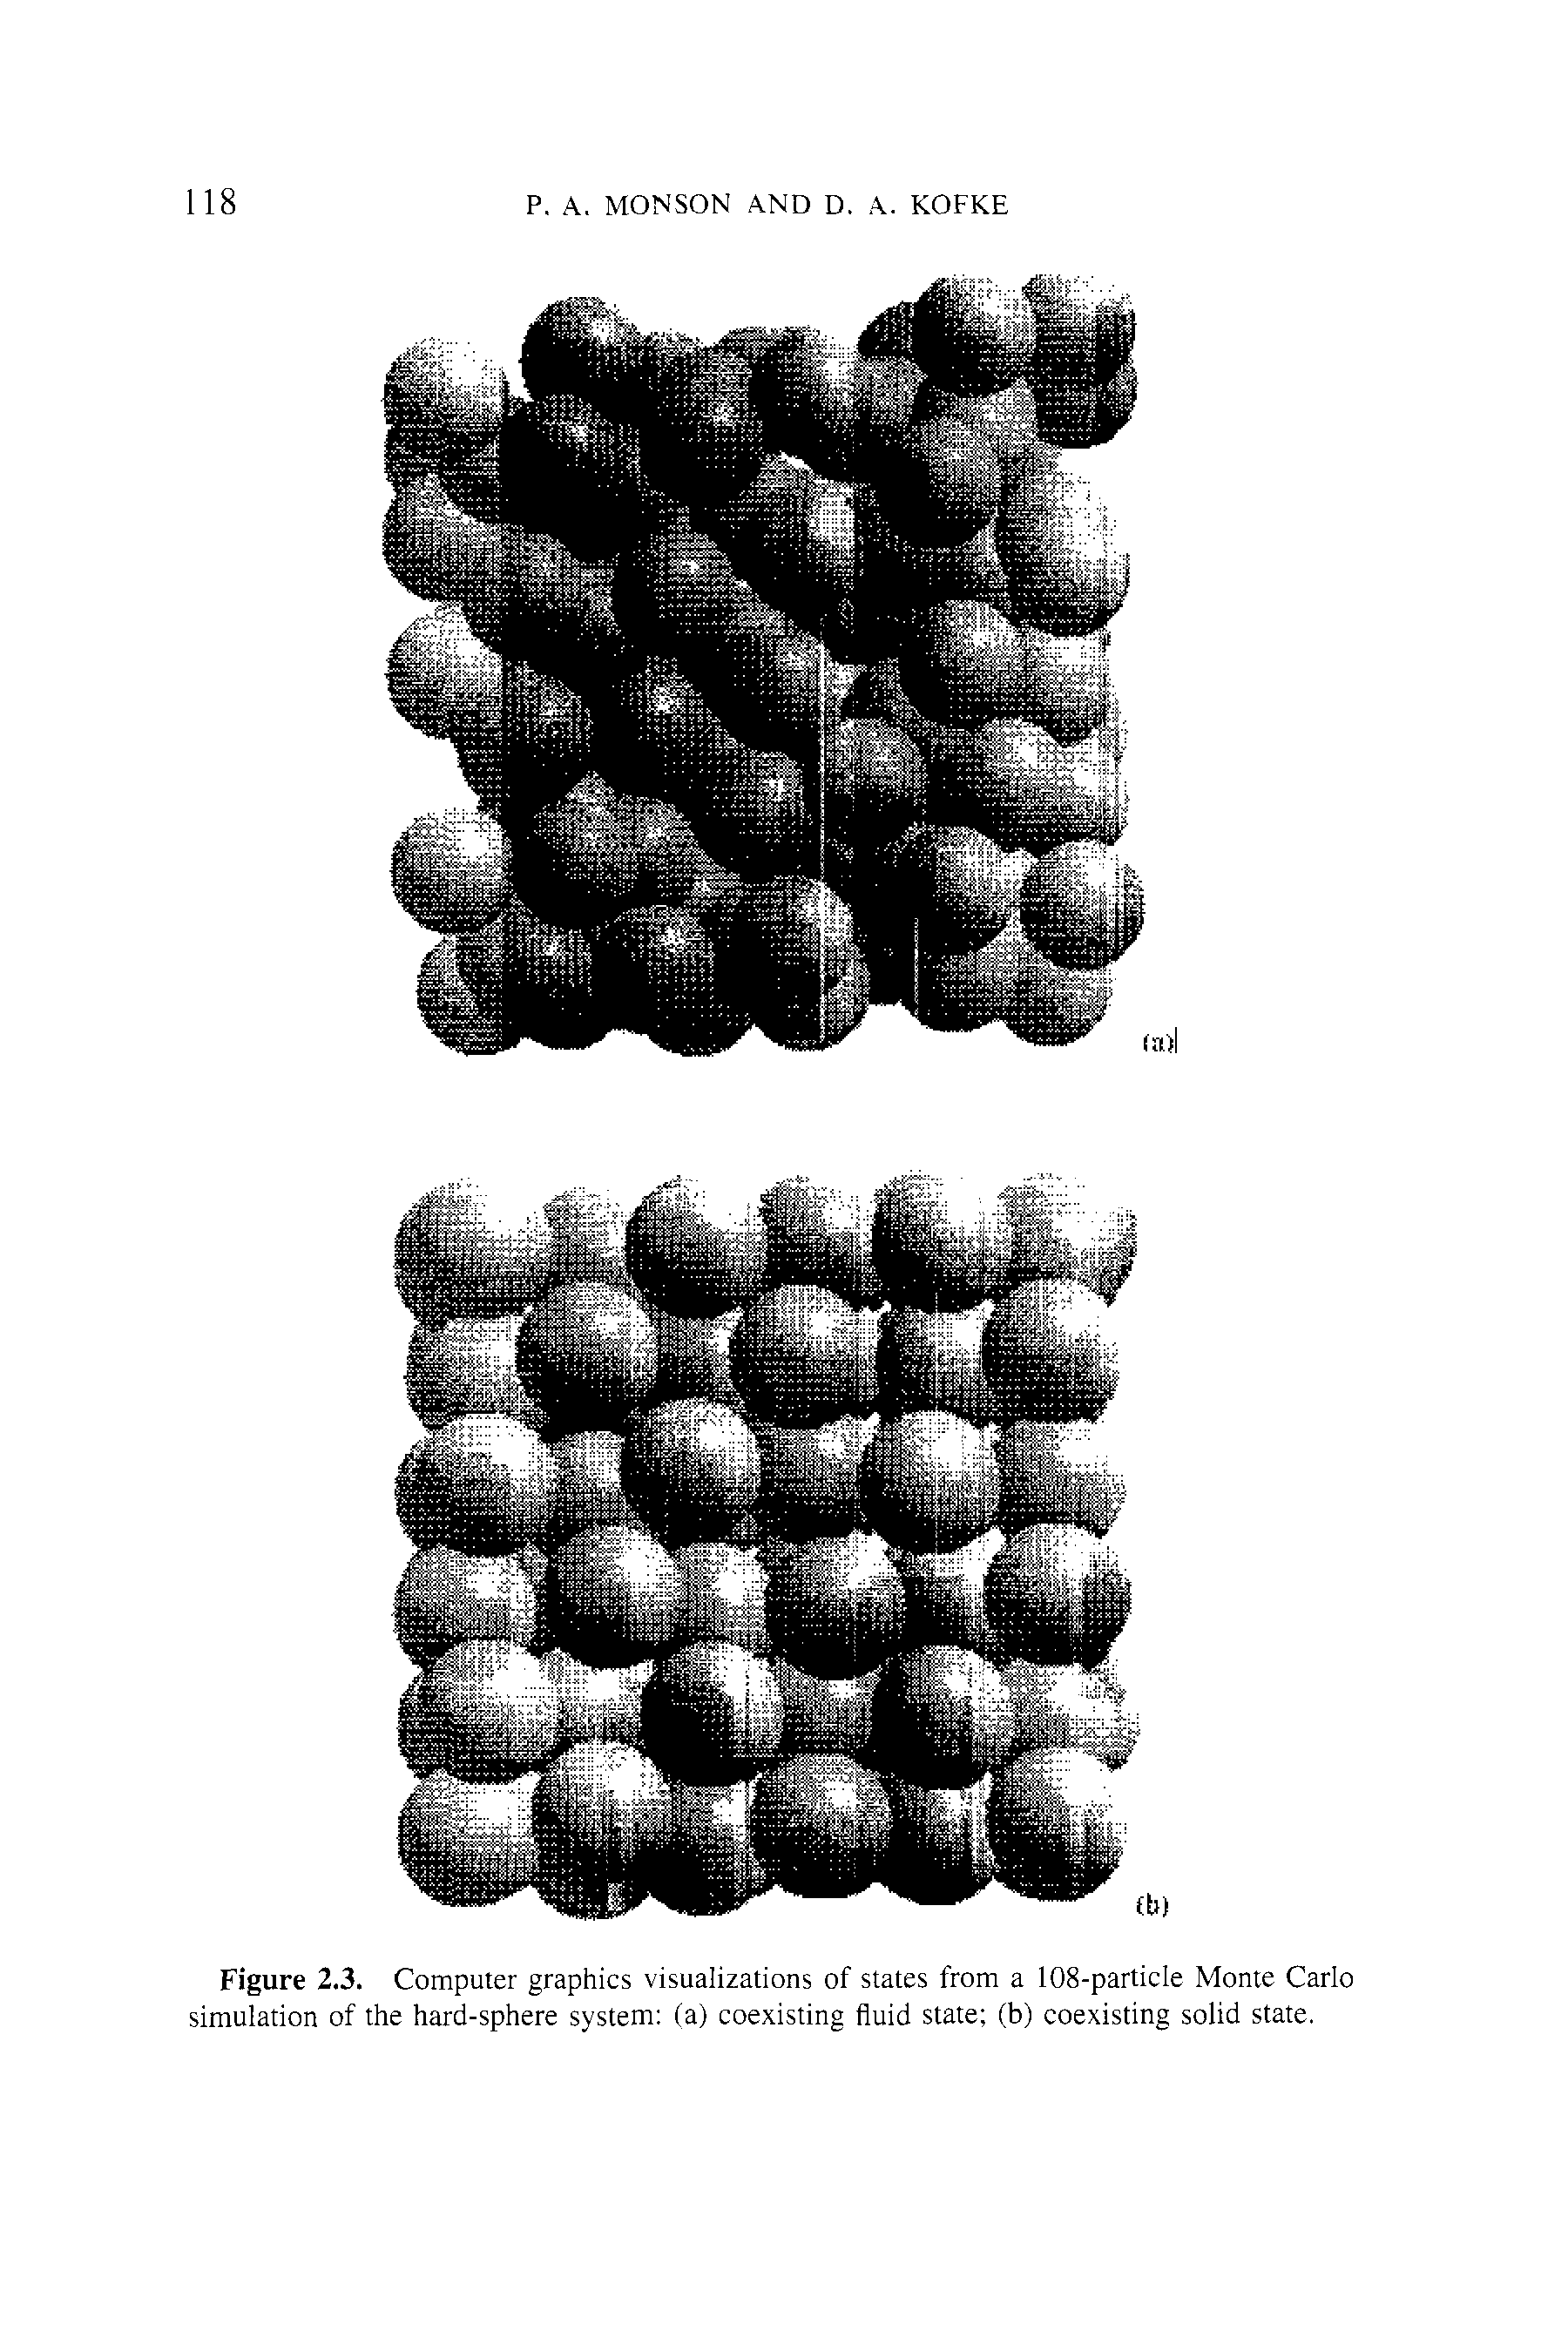 Figure 2.3. Computer graphics visualizations of states from a 108-particIe Monte Carlo simulation of the hard-sphere system (a) coexisting fluid state (b) coexisting solid state.